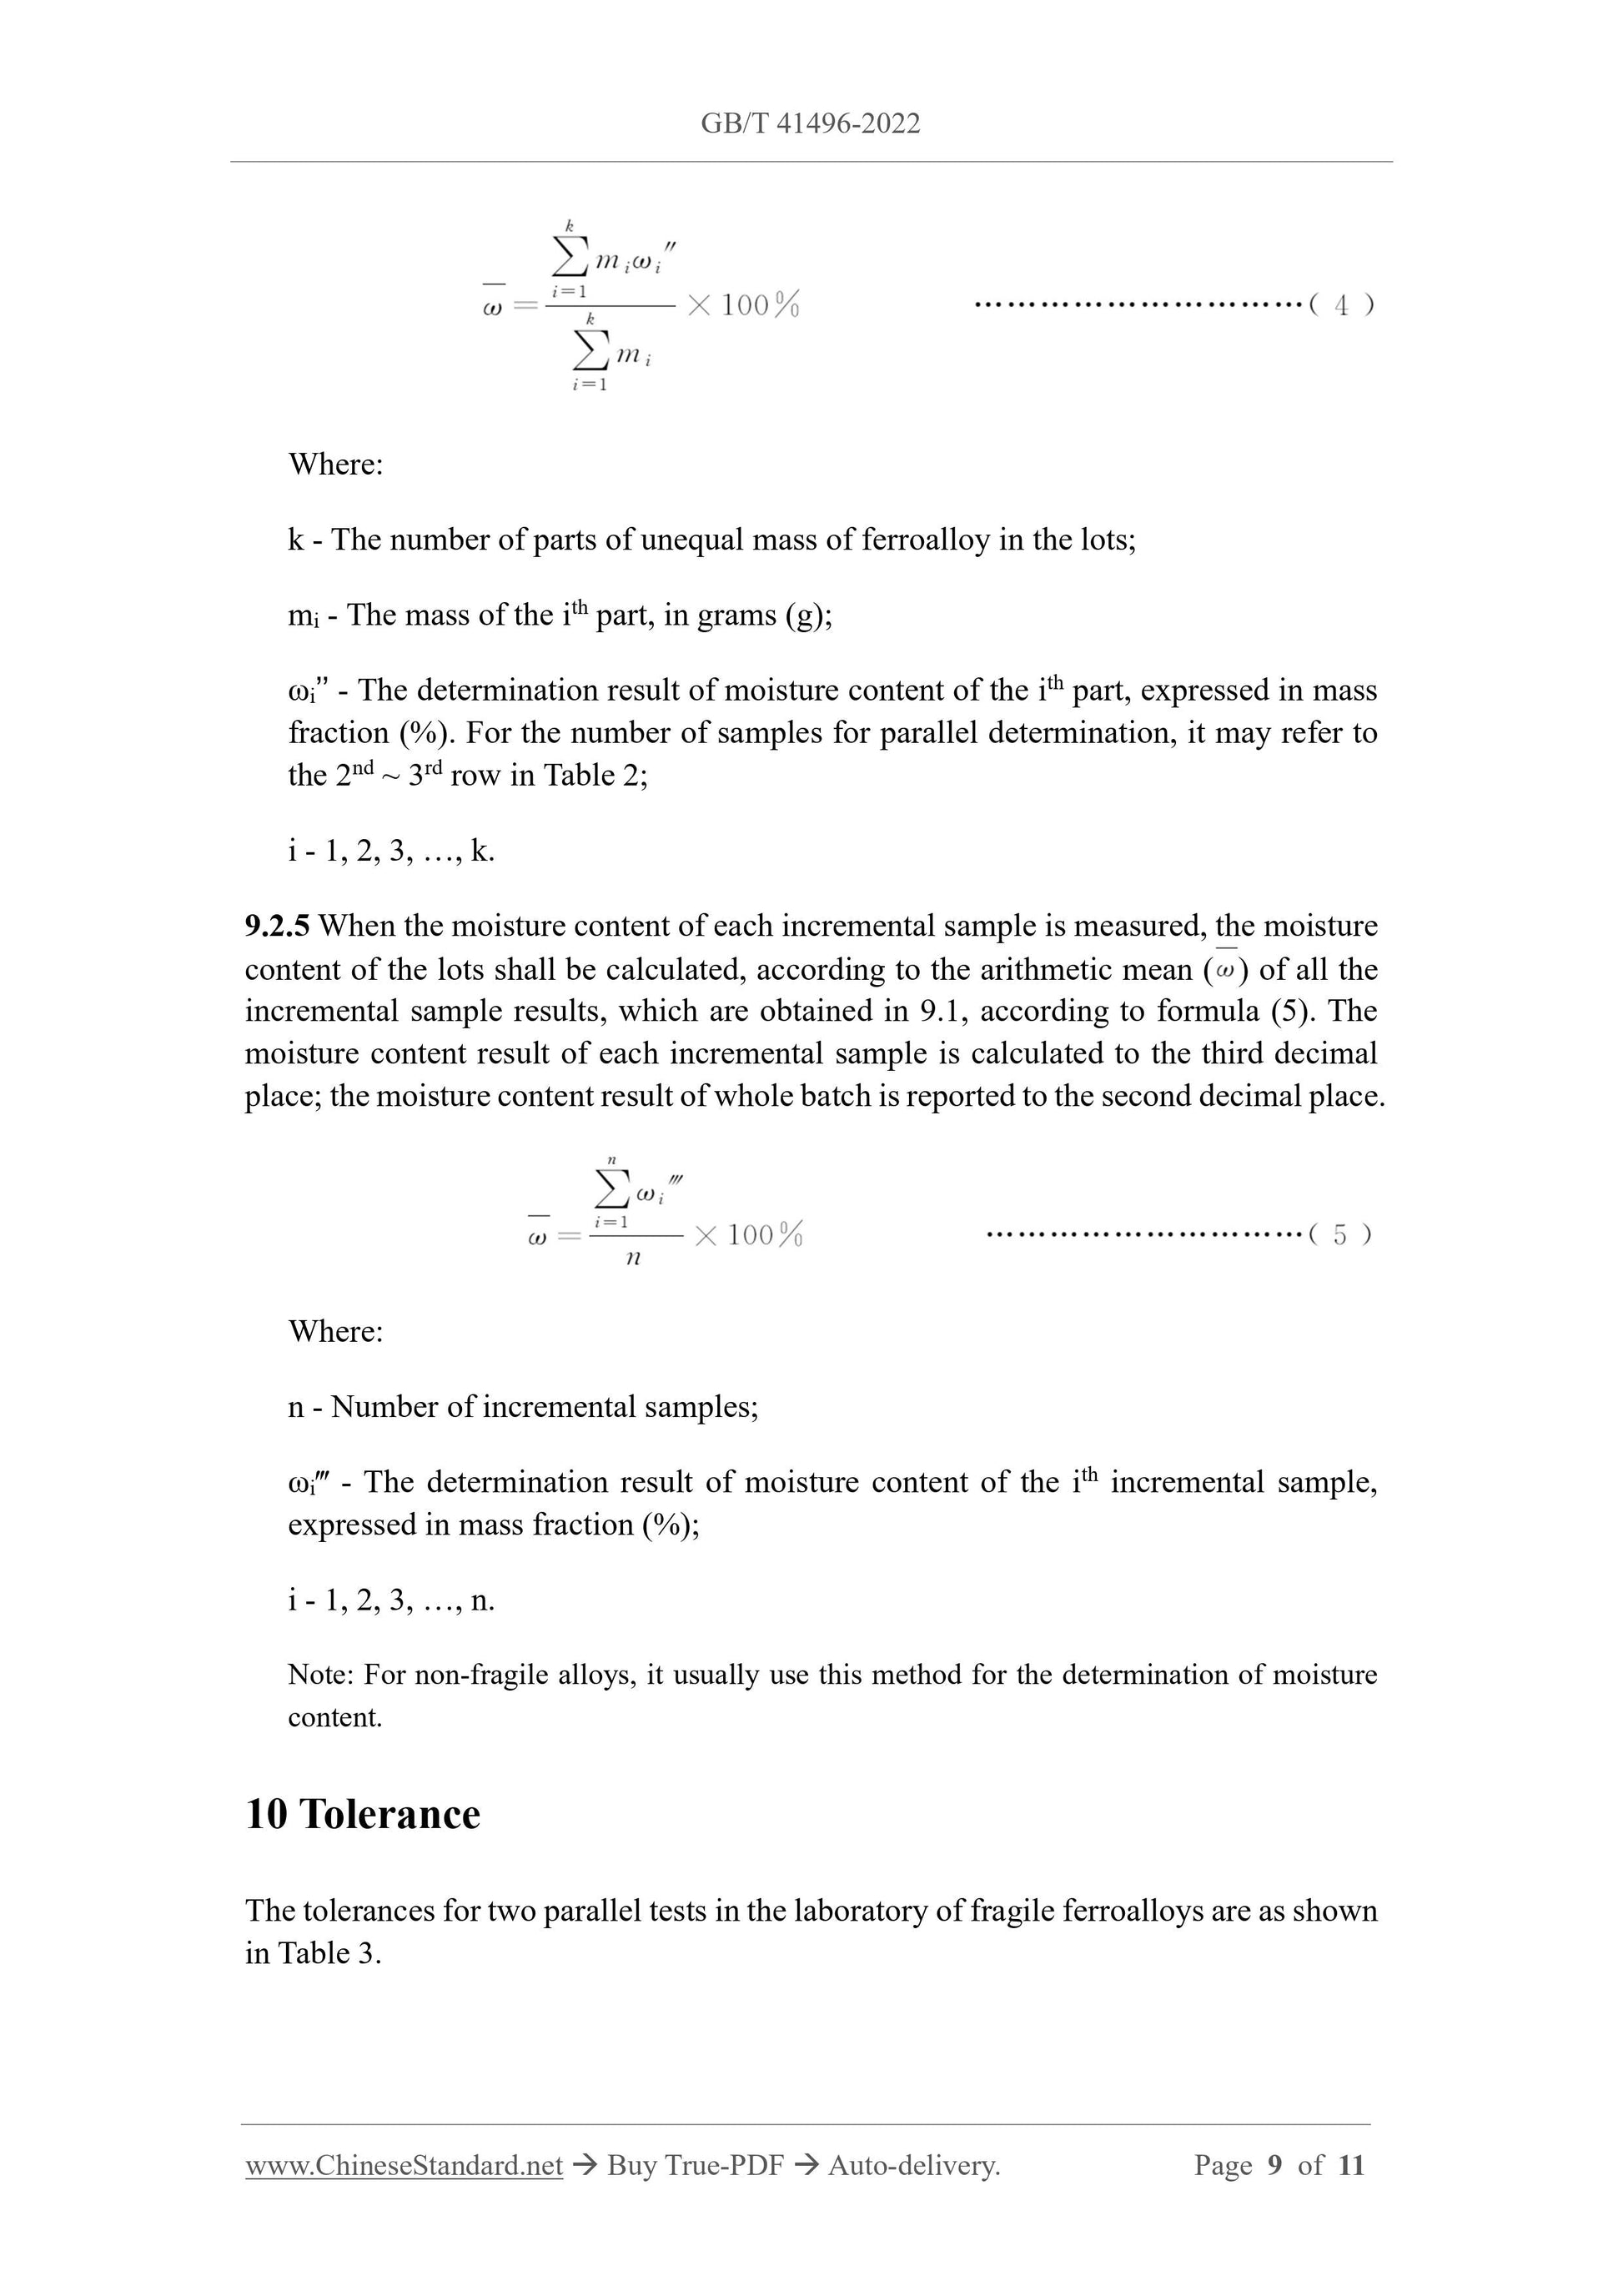 GB/T 41496-2022 Page 6